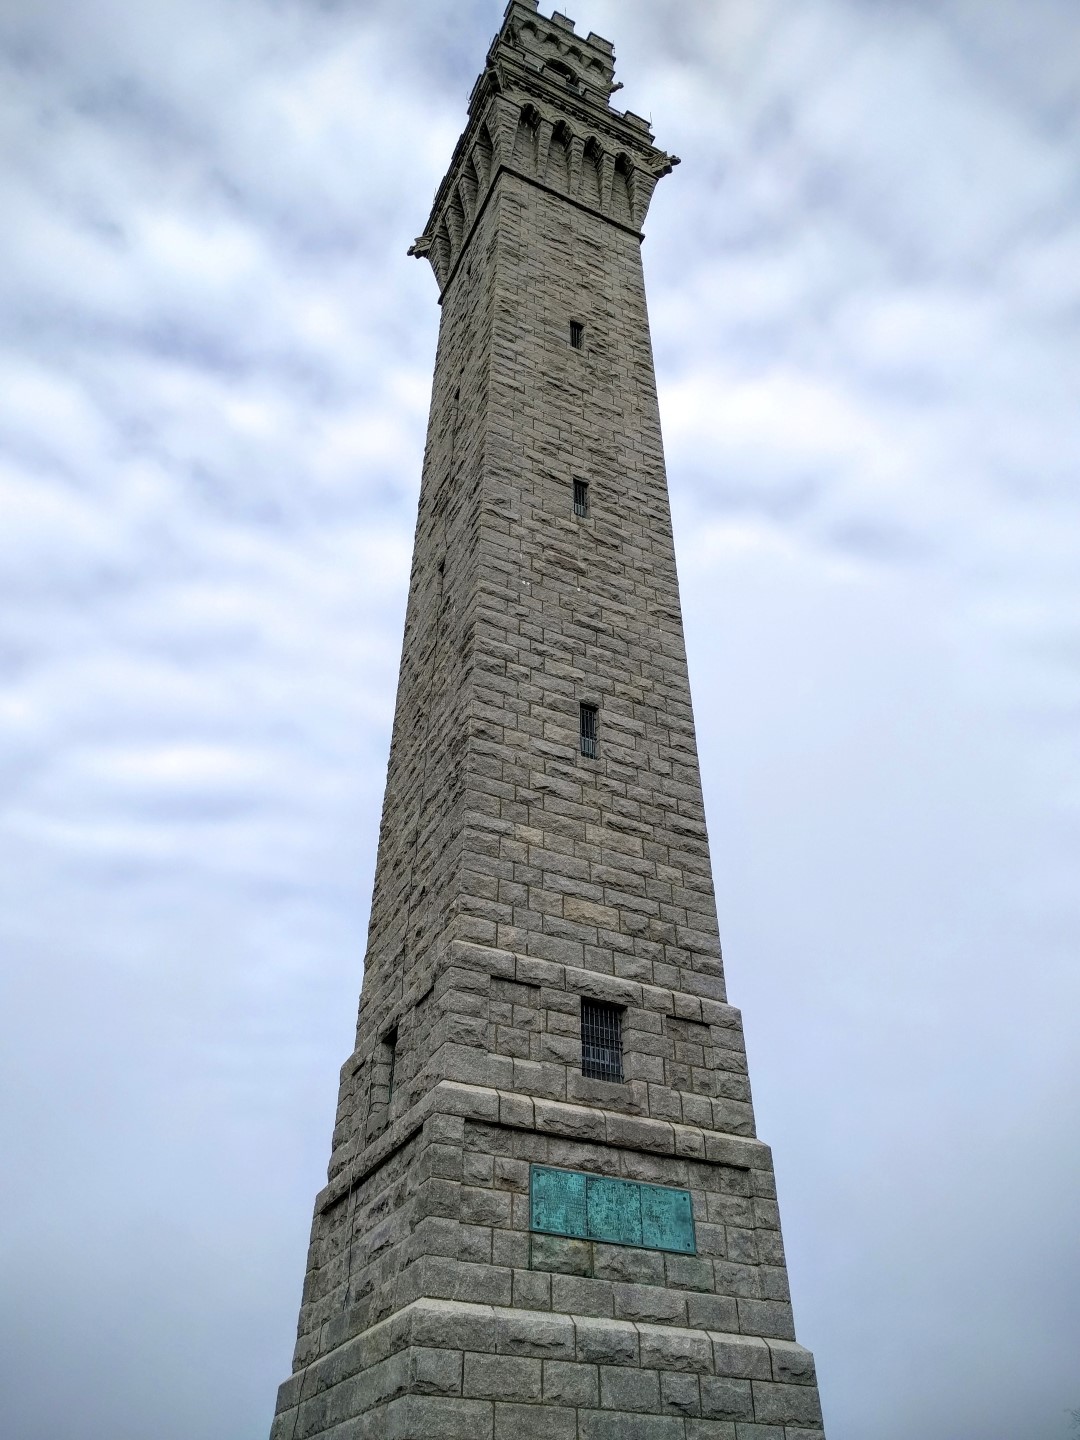 Getting ready to climb the Pilgrim Monument